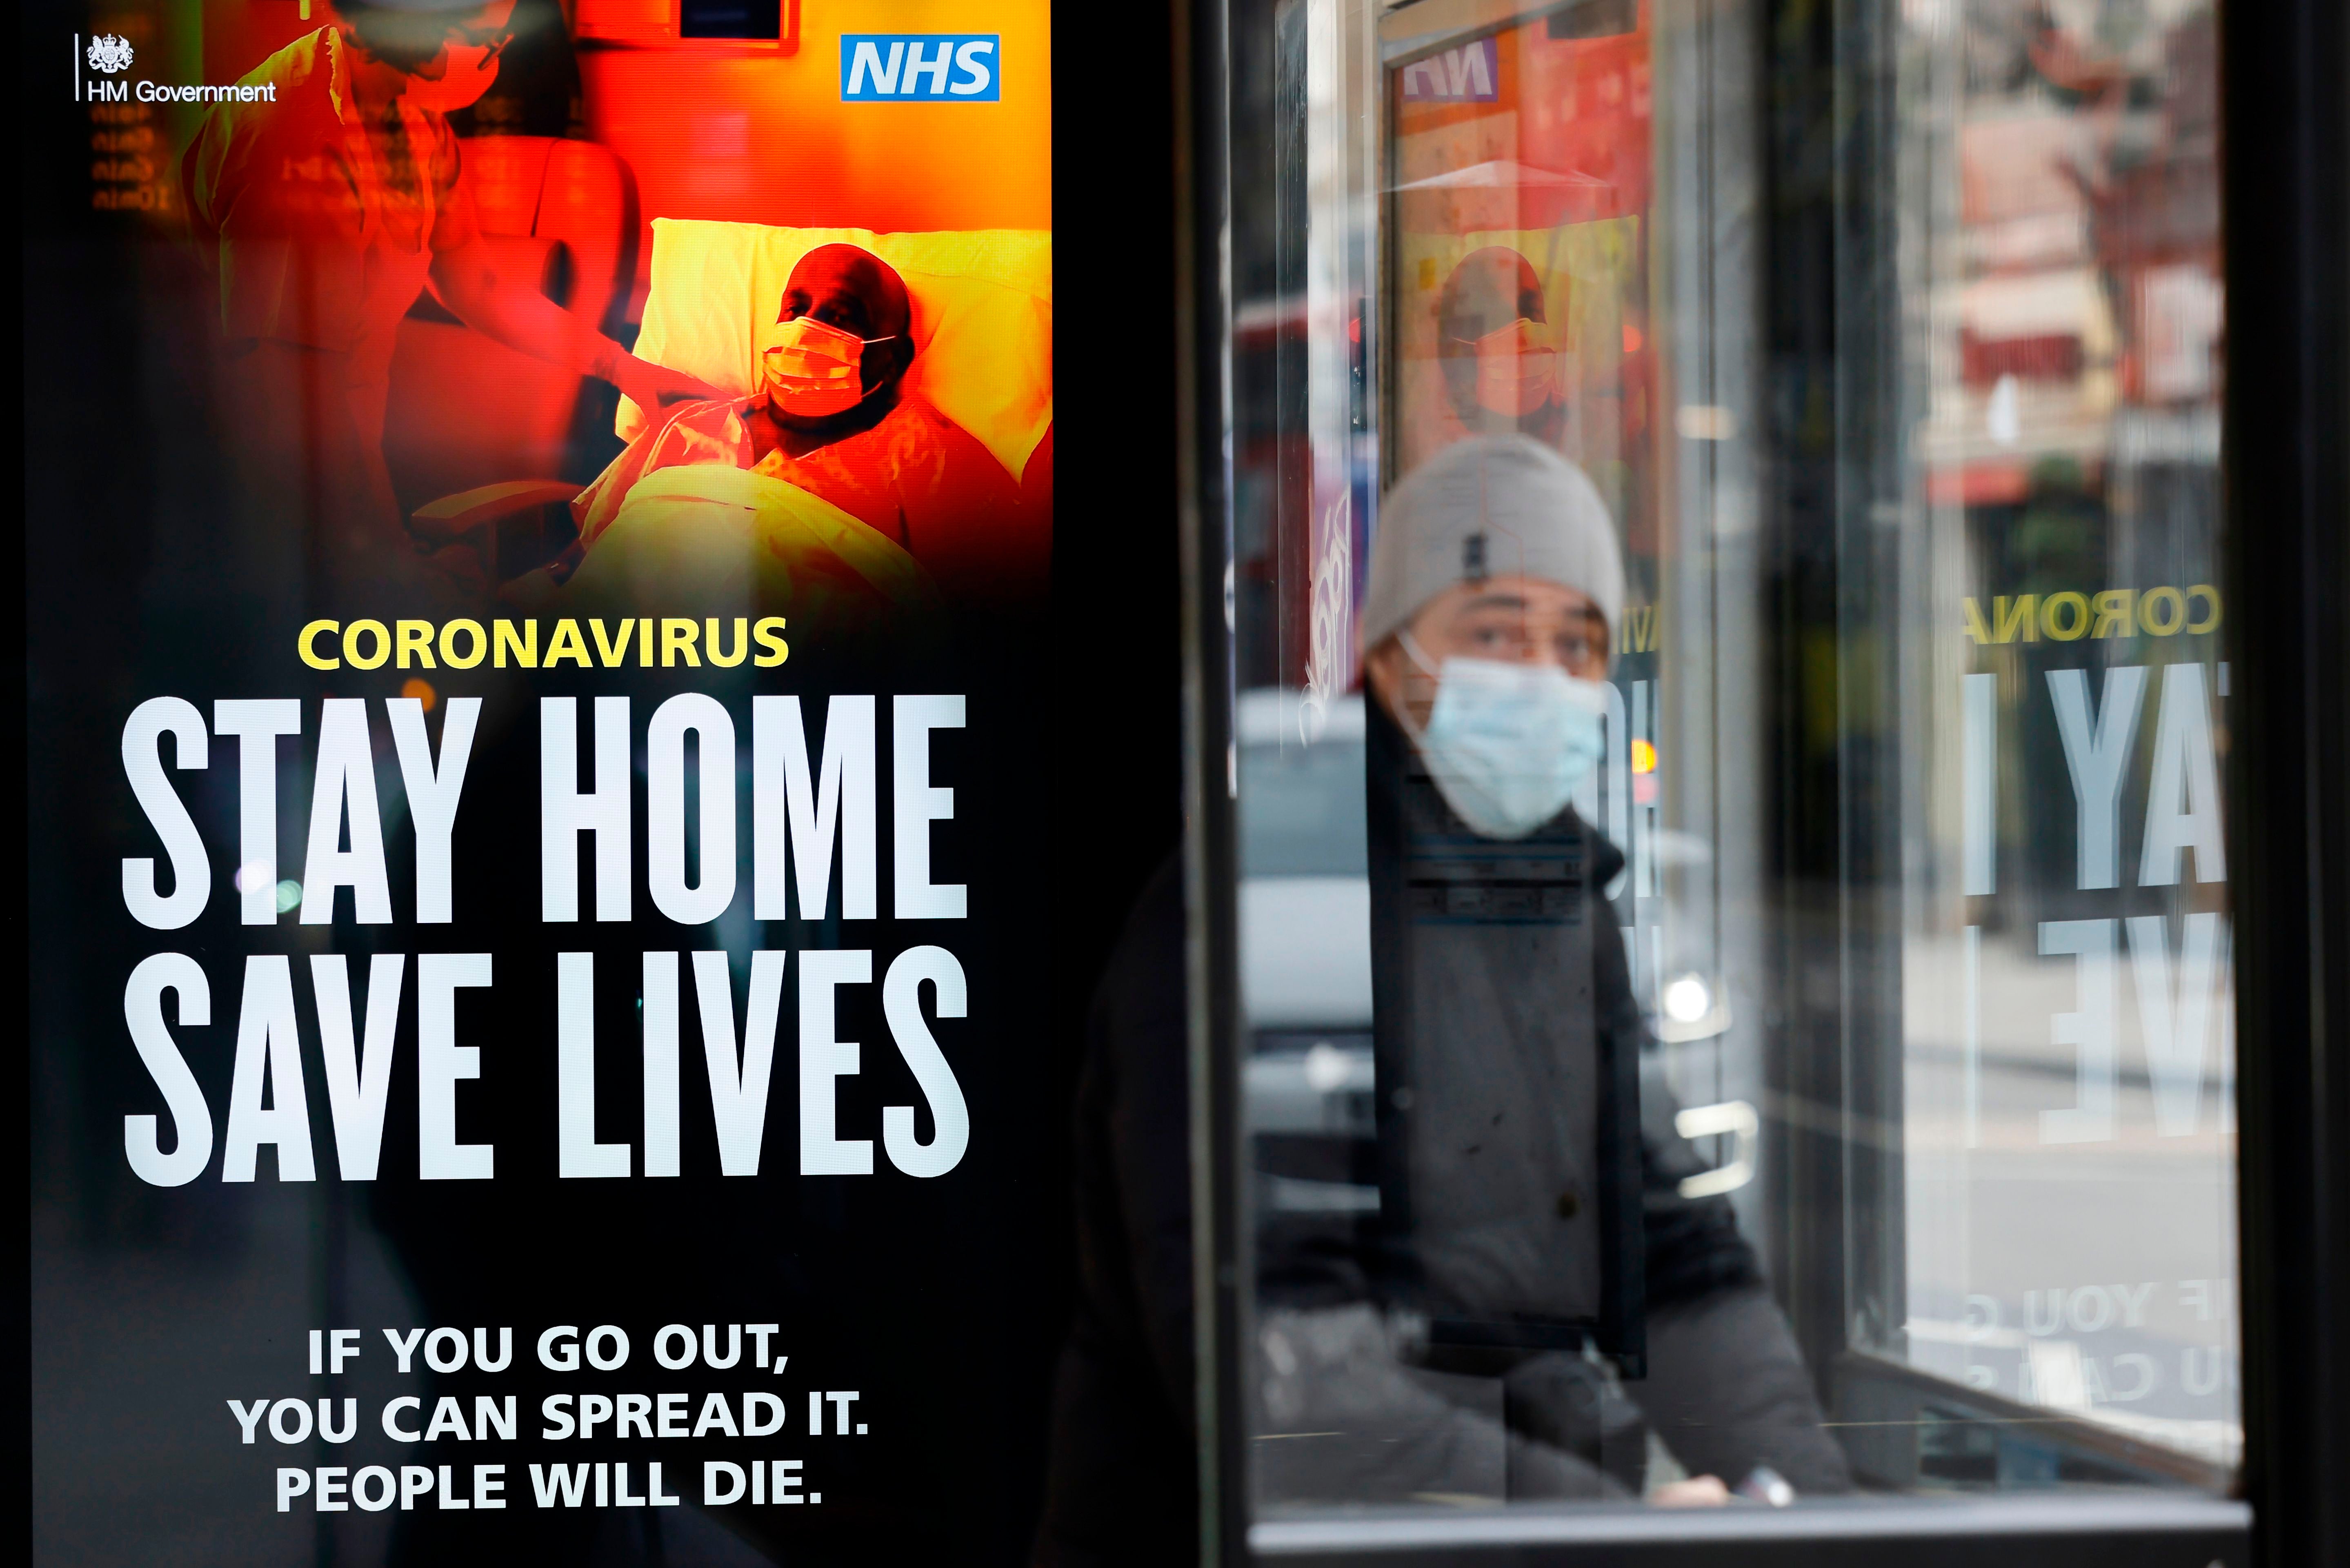 ONS data found that suicide rates fell during the first coronavirus lockdown in 2020